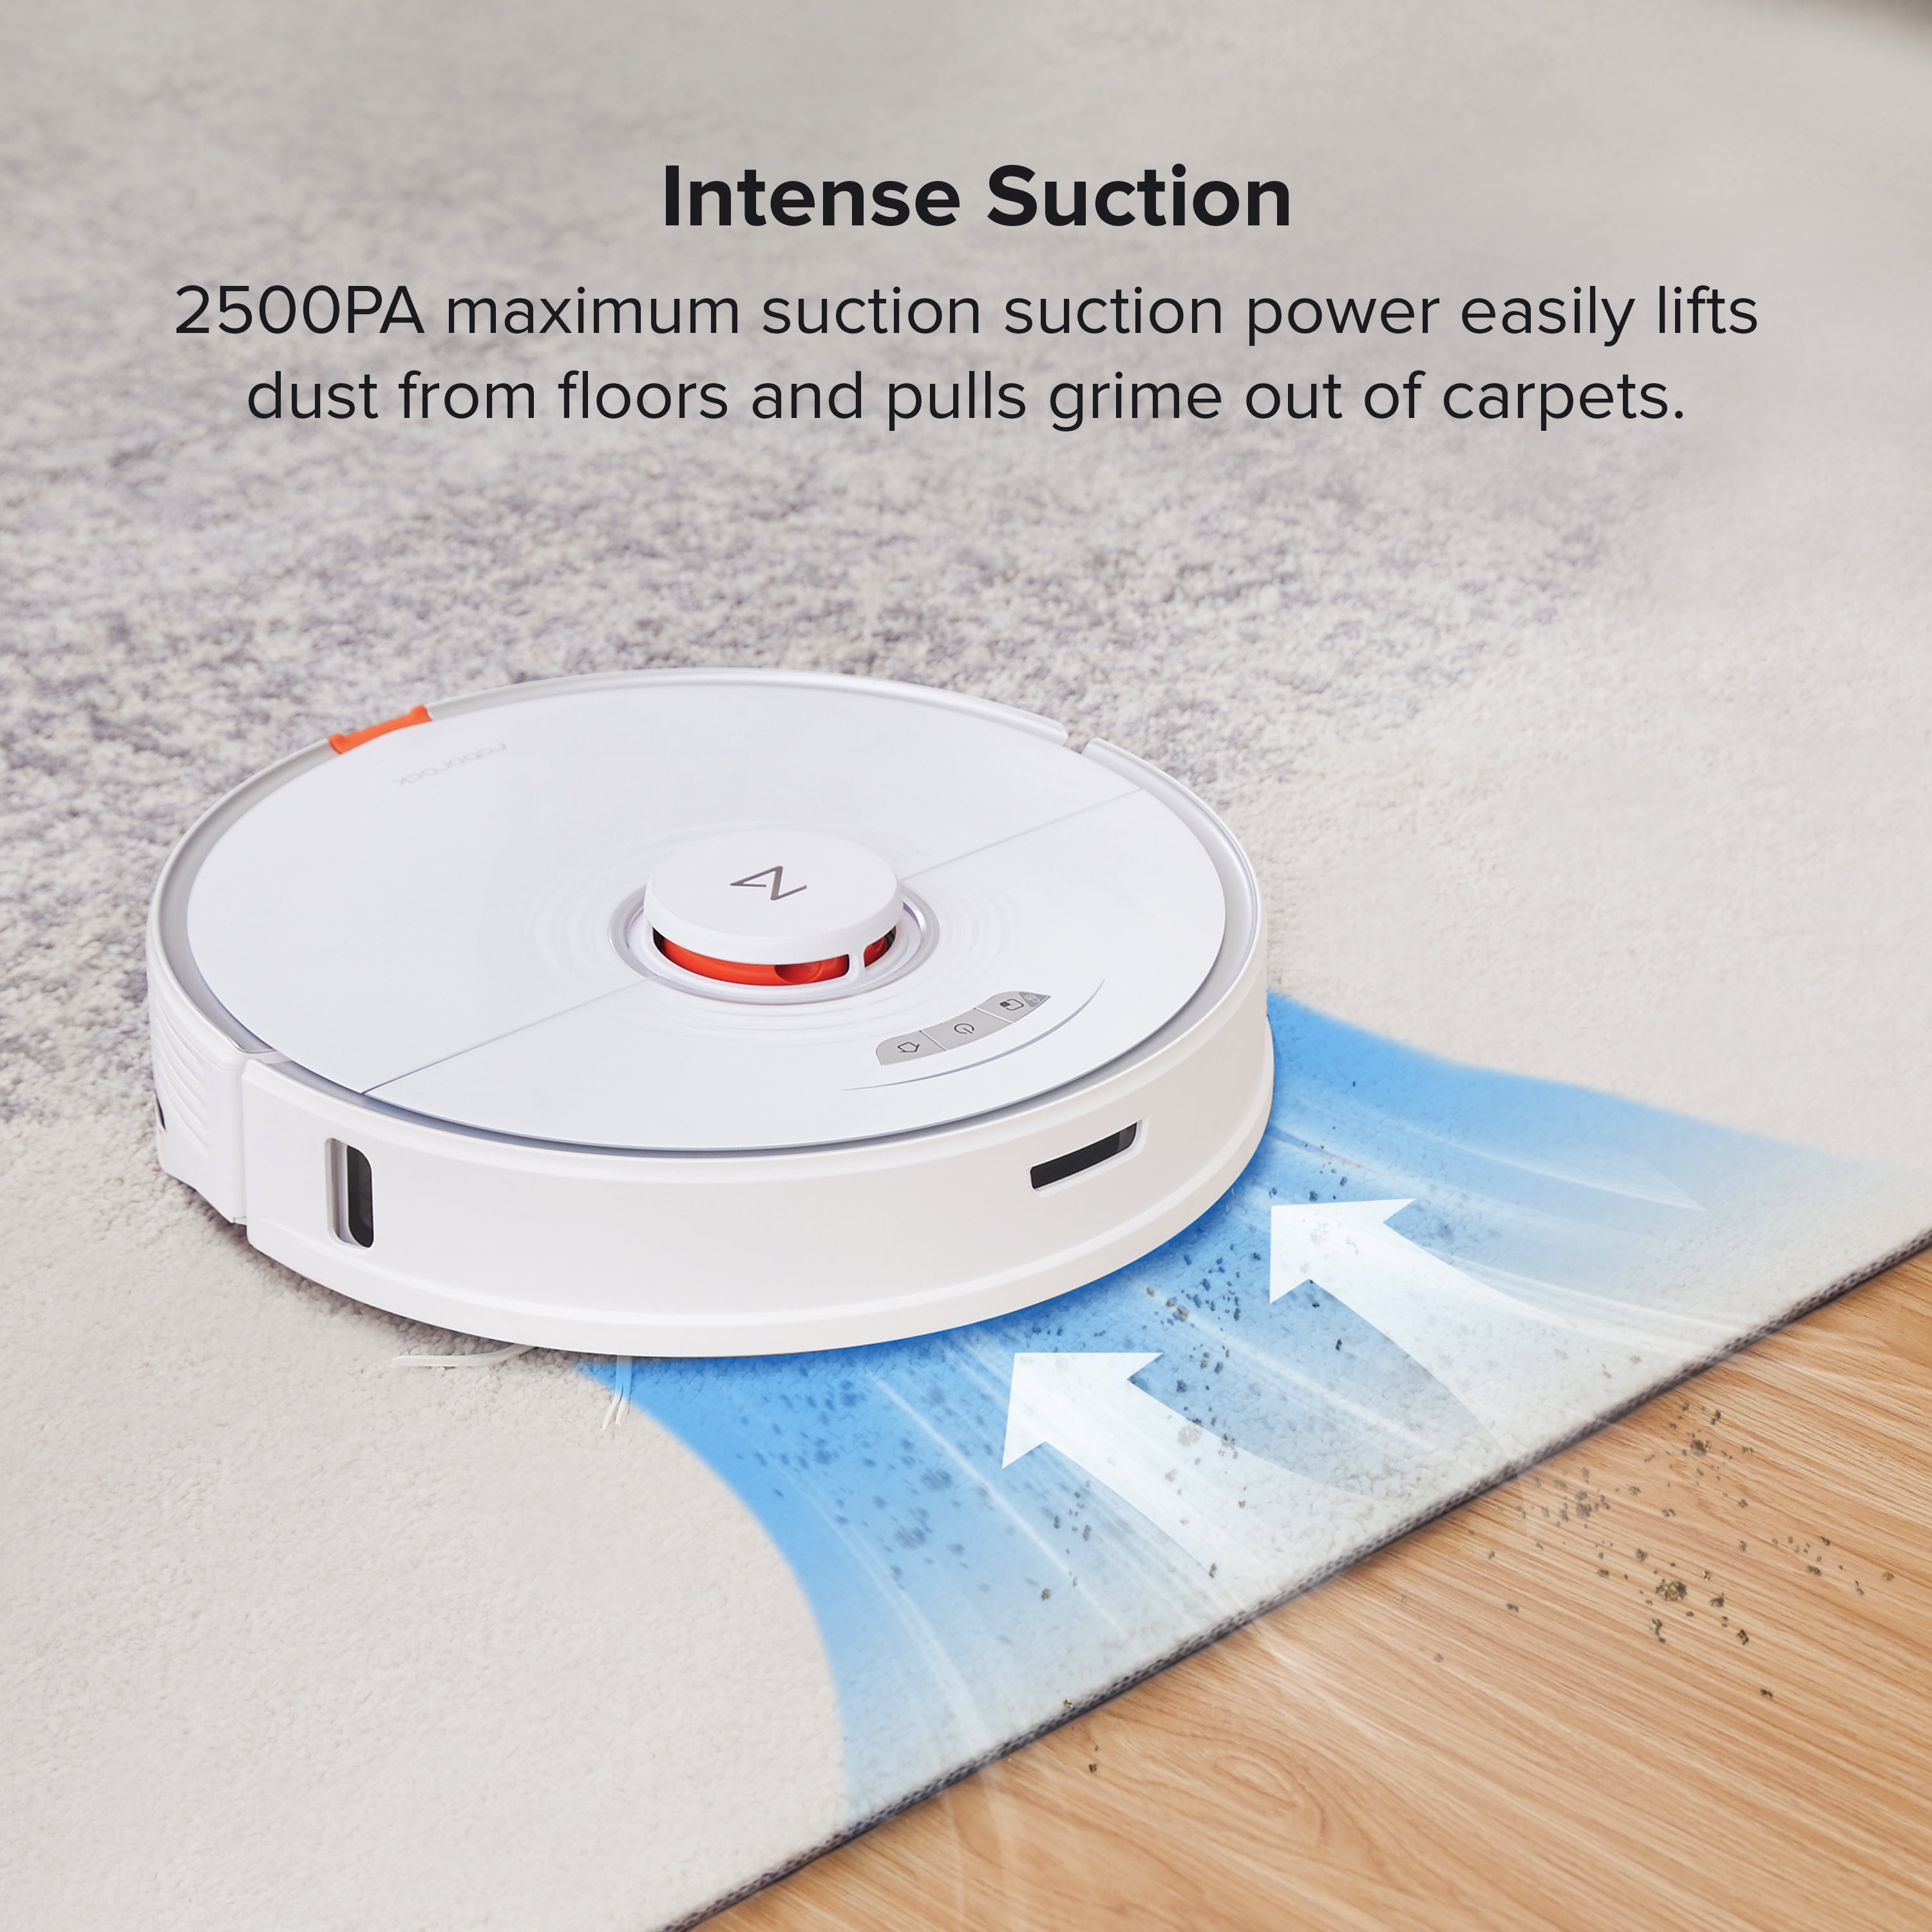 Roborock's Powerful S7 MaxV Robot Vacuum Is a Great Bargain at Over $300  Off - CNET